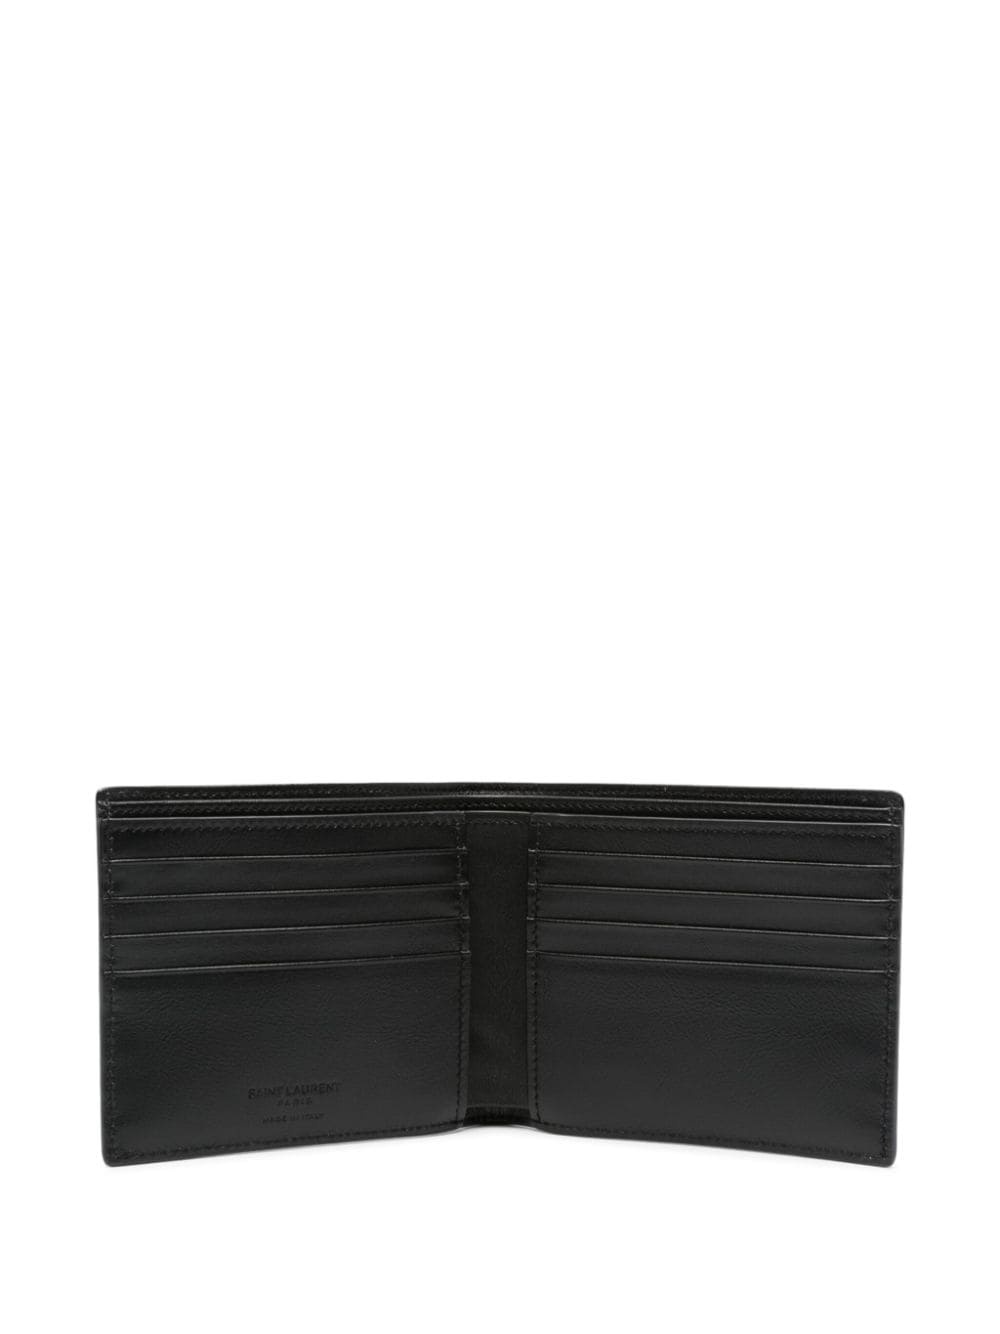 East/West leather wallet - 3